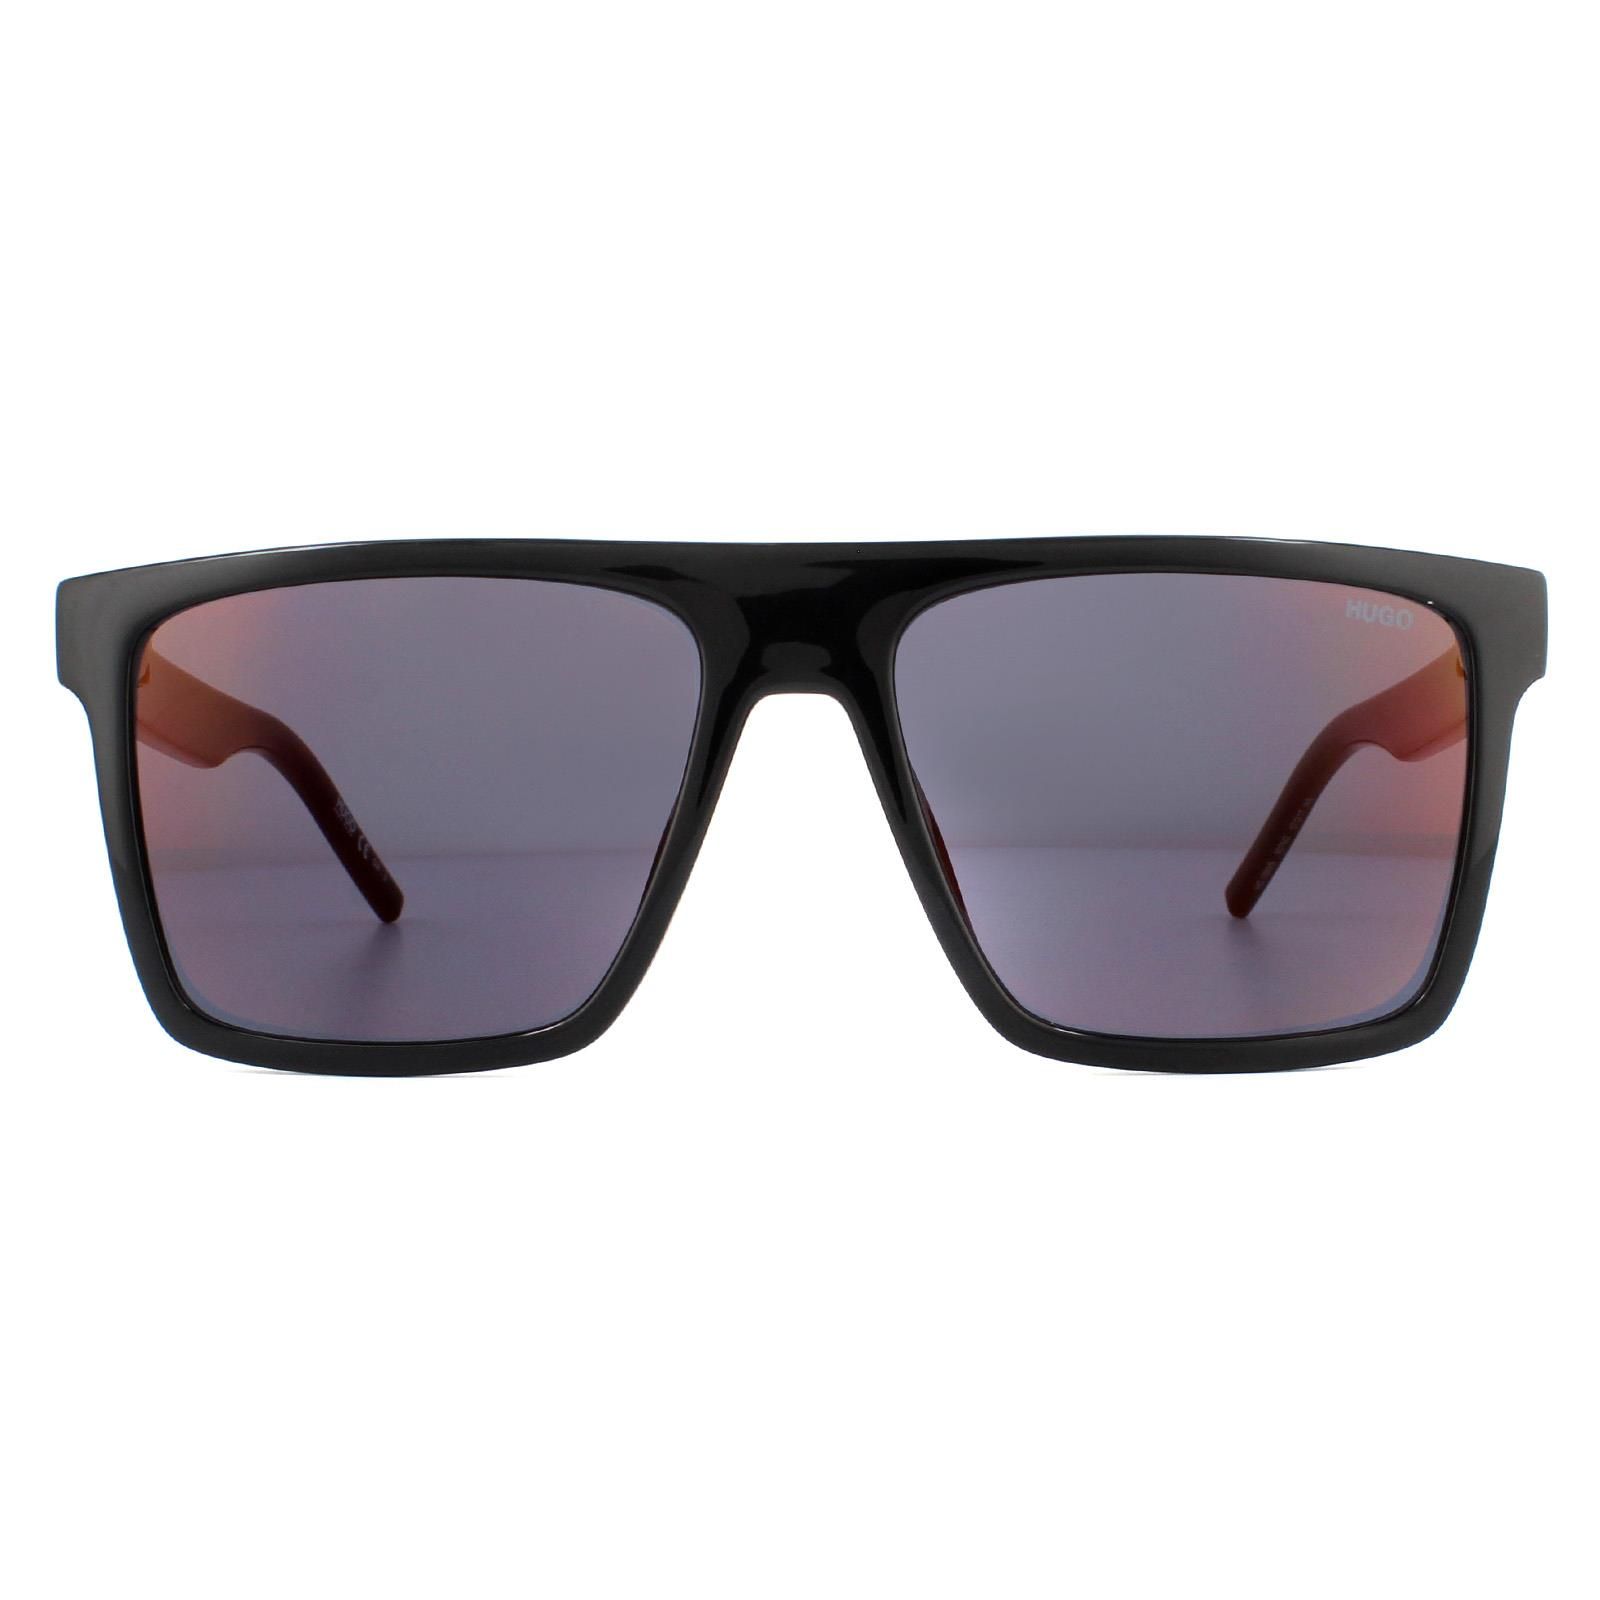 Hugo by Hugo Boss Sunglasses 1069/S 807 AO Black Red are a large square design made from lightweight acetate. The flat frame top creates a contemporary feel and the temples feature the Hugo logo.